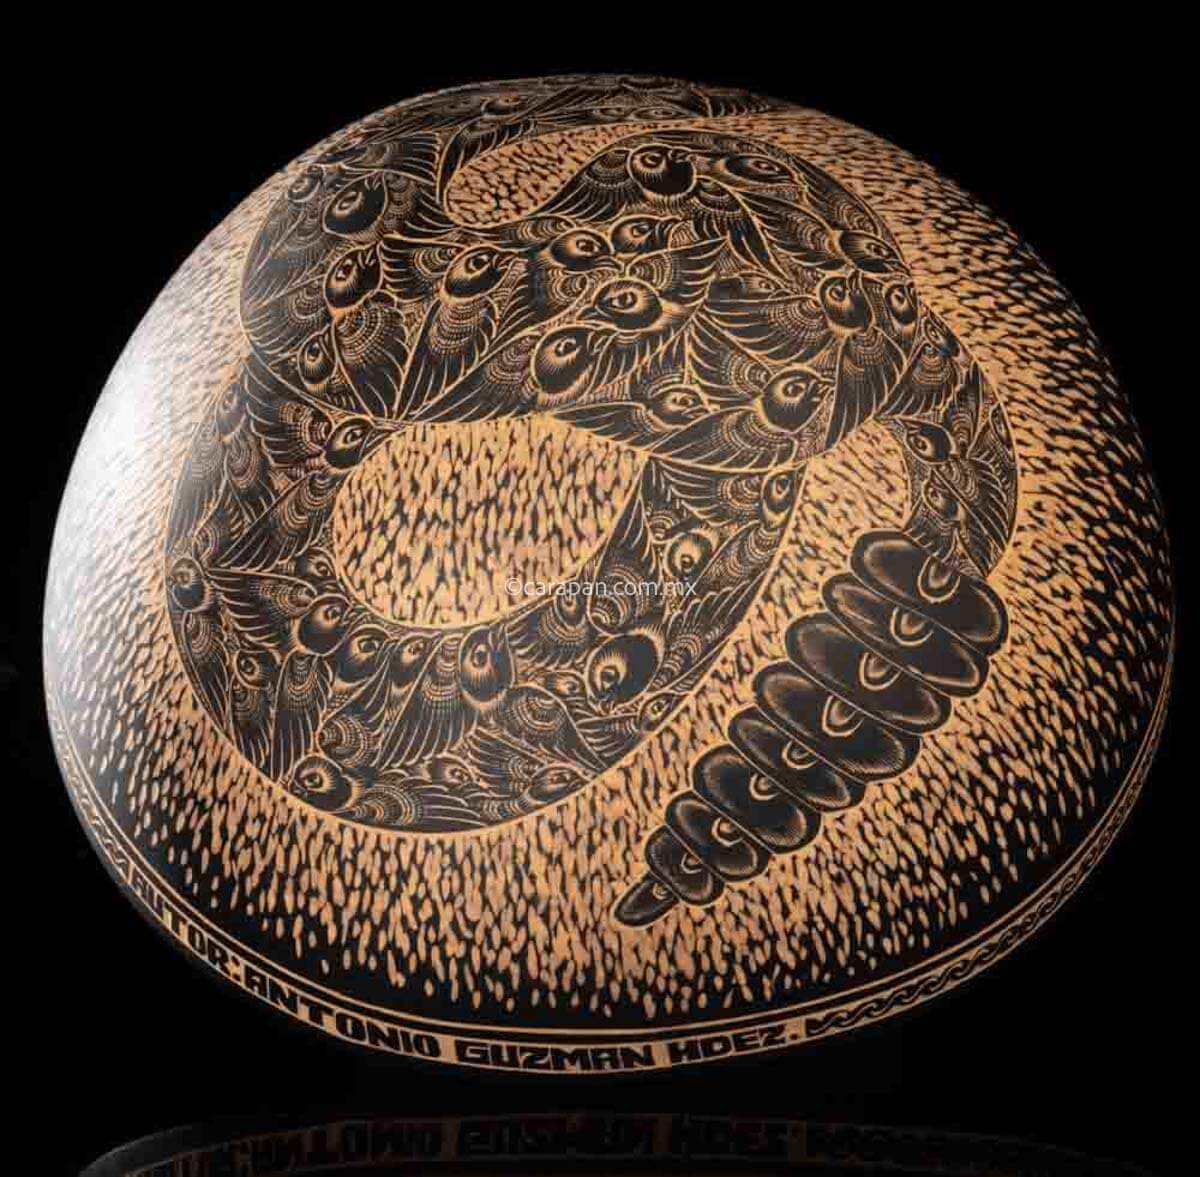 Engraved Gourd decorated with a rattlesnake. Its body is fully covered with pigeon birds. The rattlesnake body is knotted and twirled in an "S" shape